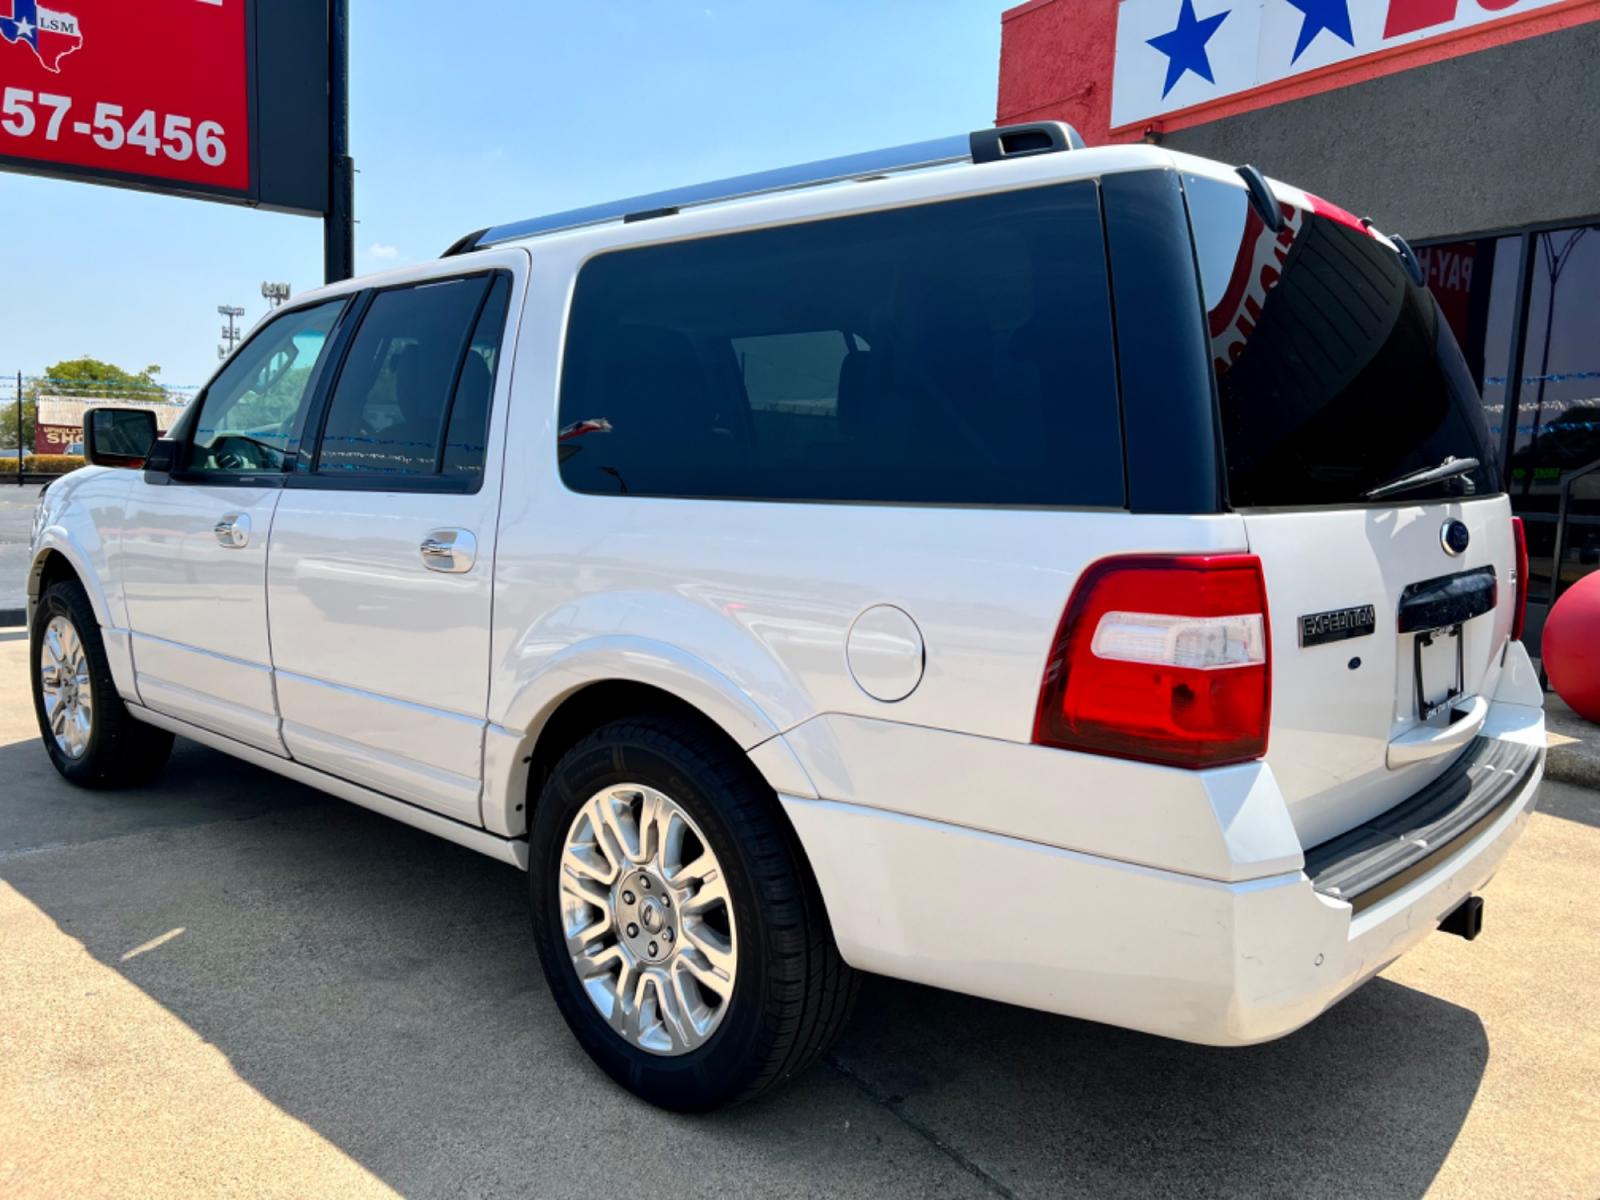 2014 WHITE FORD EXPEDITION EL (1FMJK1K5XEE) , located at 5900 E. Lancaster Ave., Fort Worth, TX, 76112, (817) 457-5456, 0.000000, 0.000000 - This is a 2014 FORD EXPEDITION EL 4 DOOR SUV that is in excellent condition. There are no dents or scratches. The interior is clean with no rips or tears or stains. All power windows, door locks and seats. Ice cold AC for those hot Texas summer days. It is equipped with a CD player, AM/FM radio, AUX - Photo #4